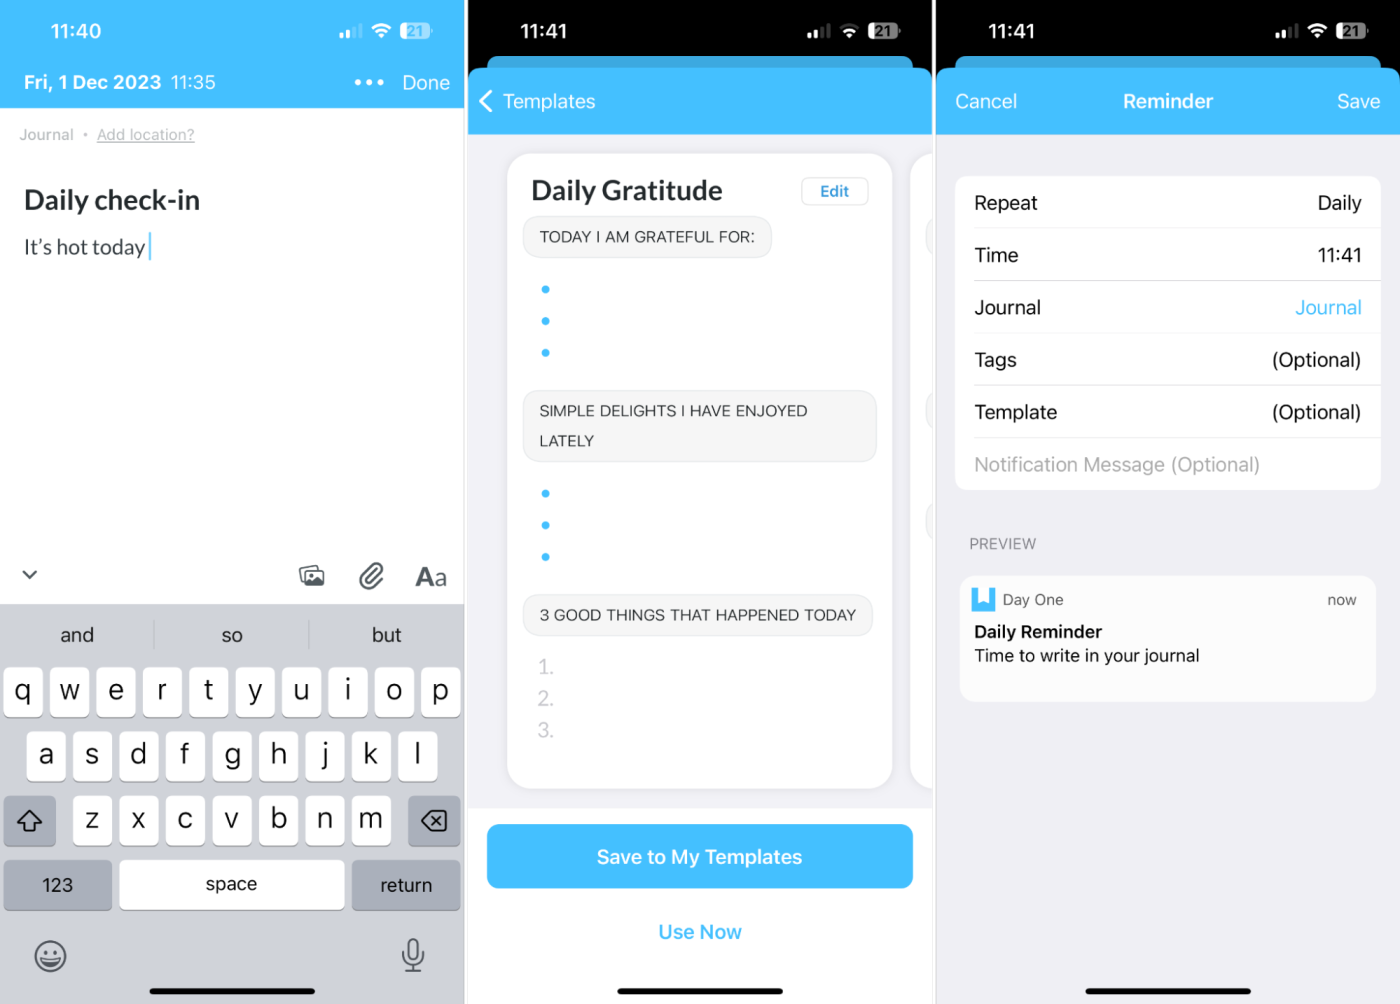 Day One, our pick for the best iPhone productivity app for journaling